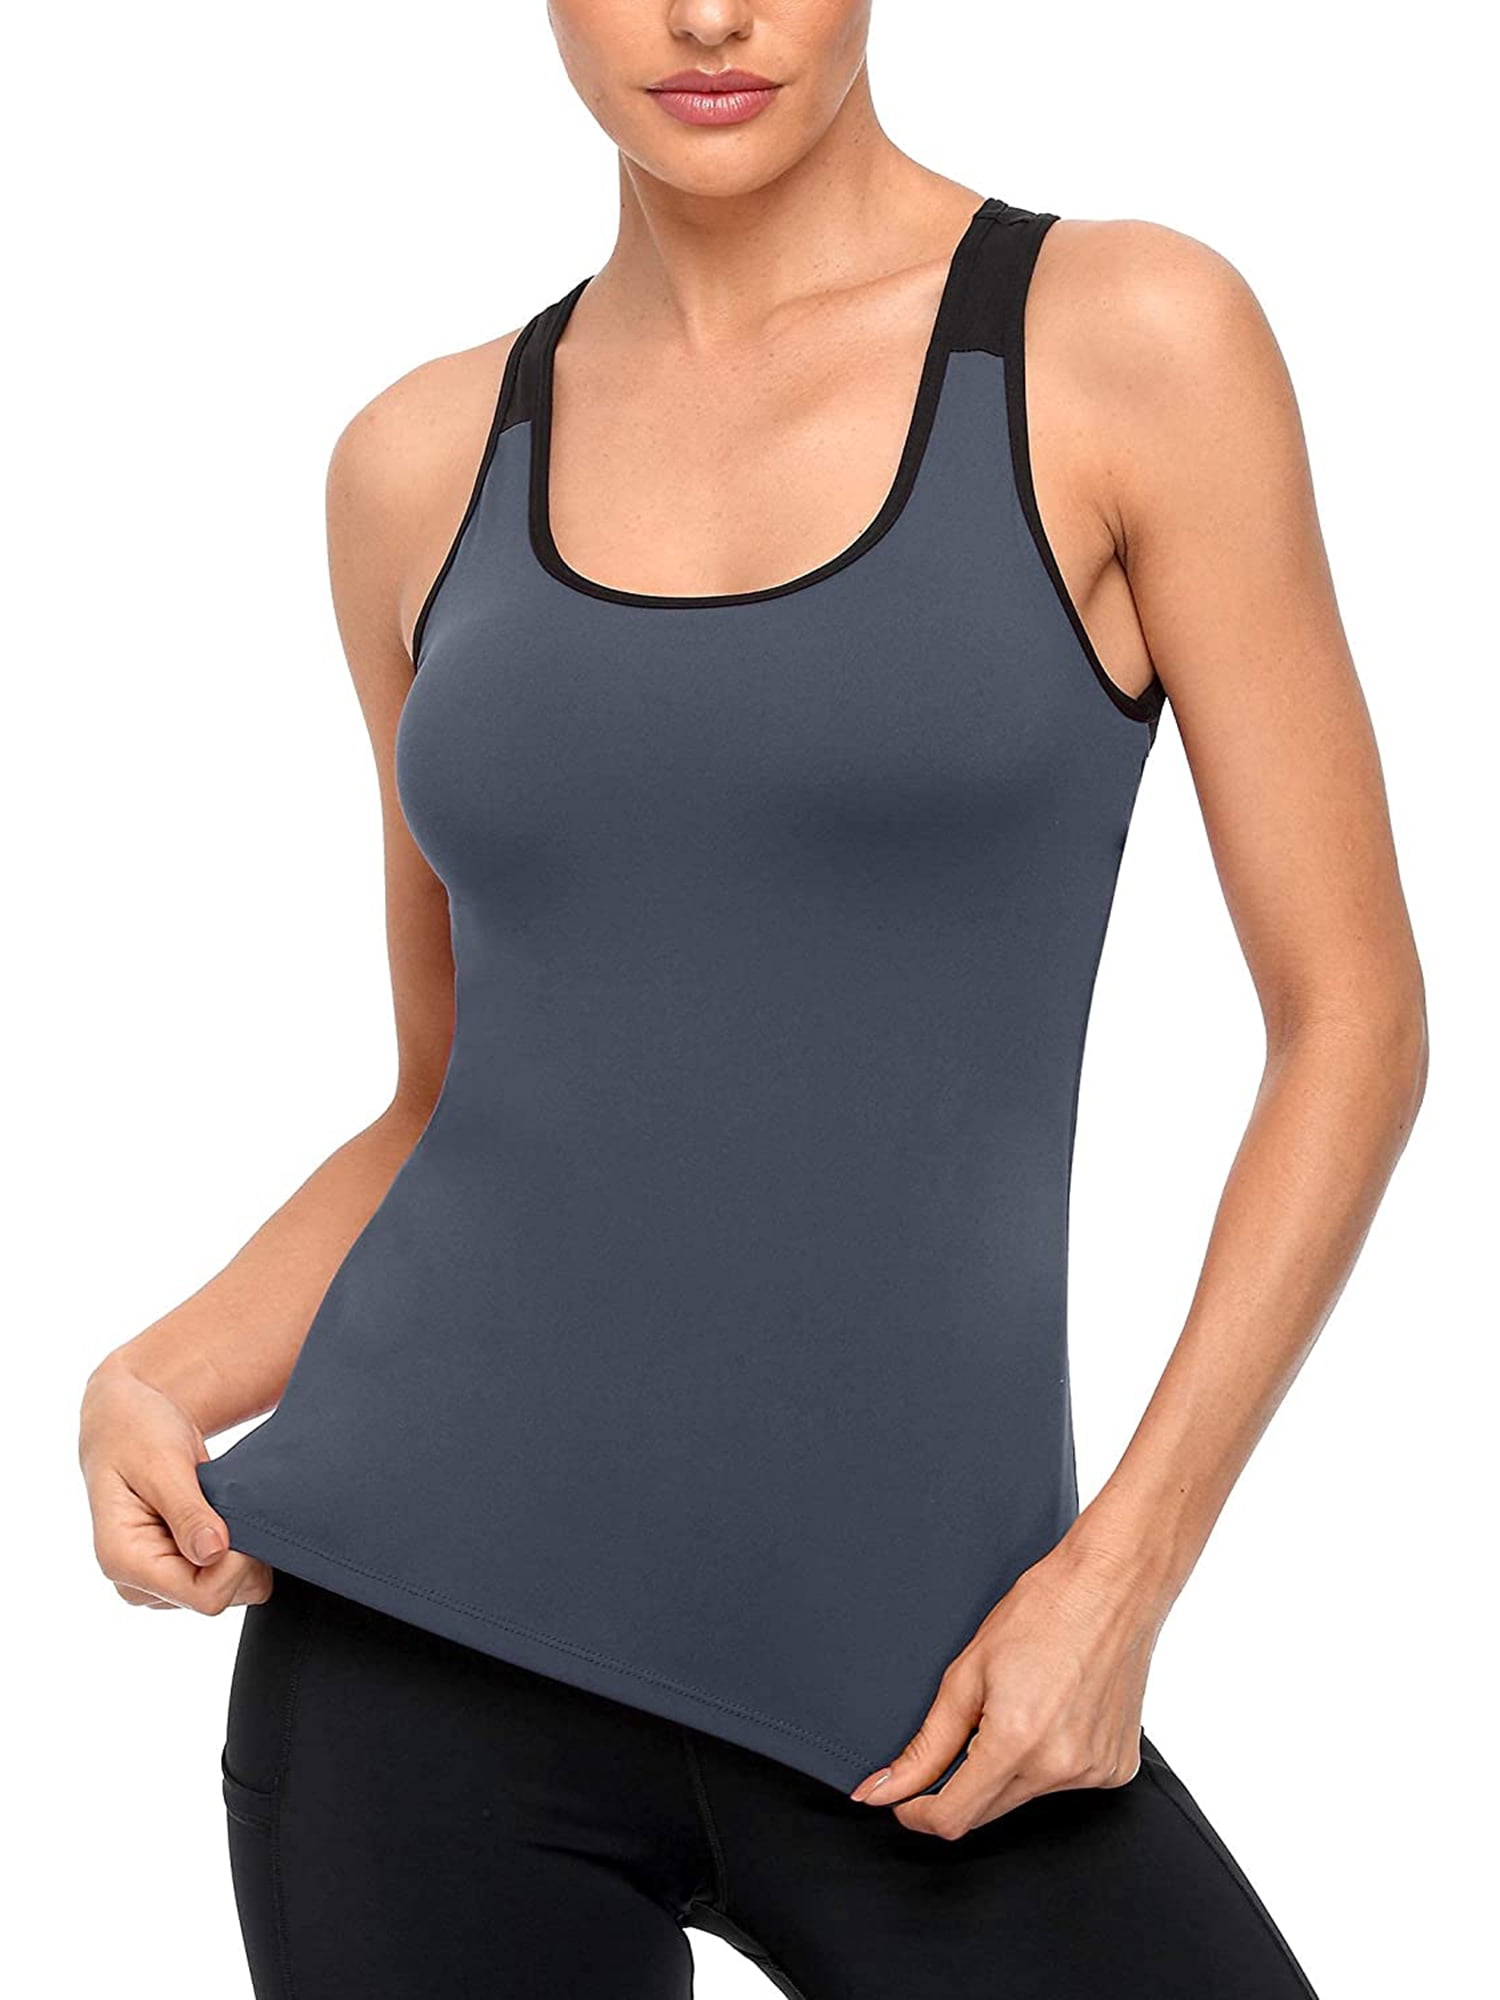 Women's Open Back Workout Tank Top with Built in Bra Athletic Yoga Running  Shirt 